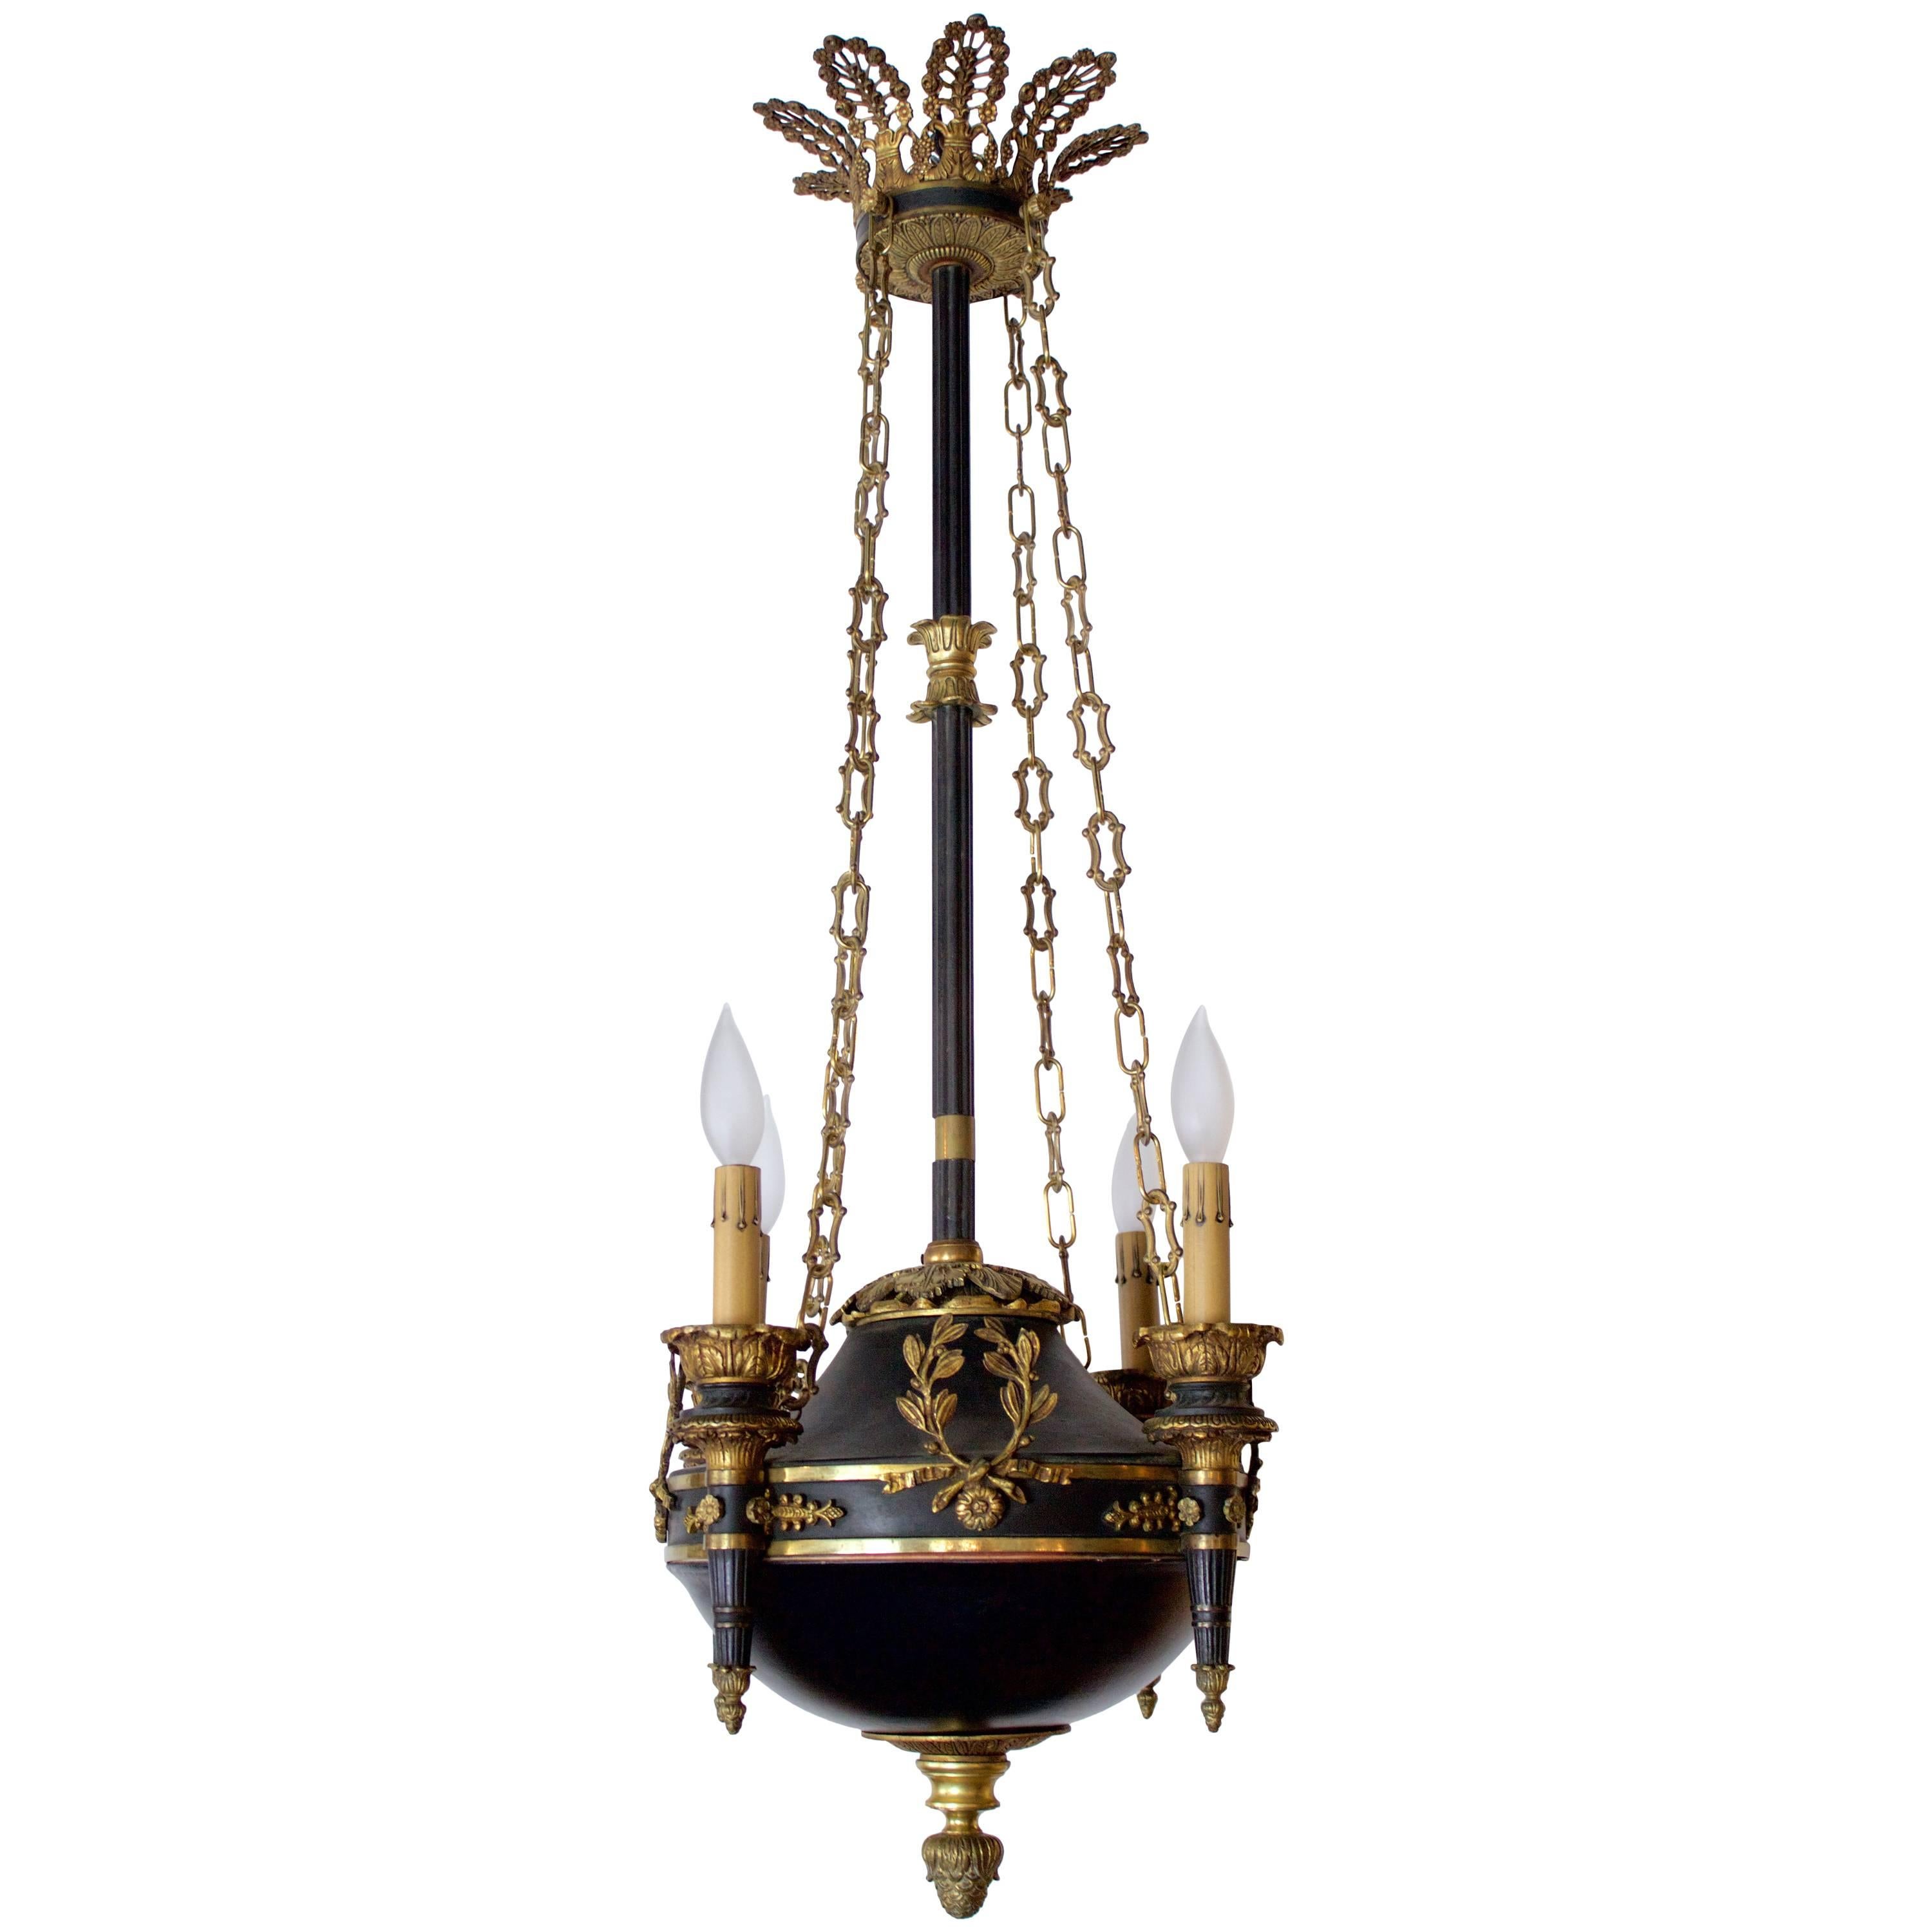 19th Century Empire Style "A I'Antique" Chandelier with Four Lights For Sale